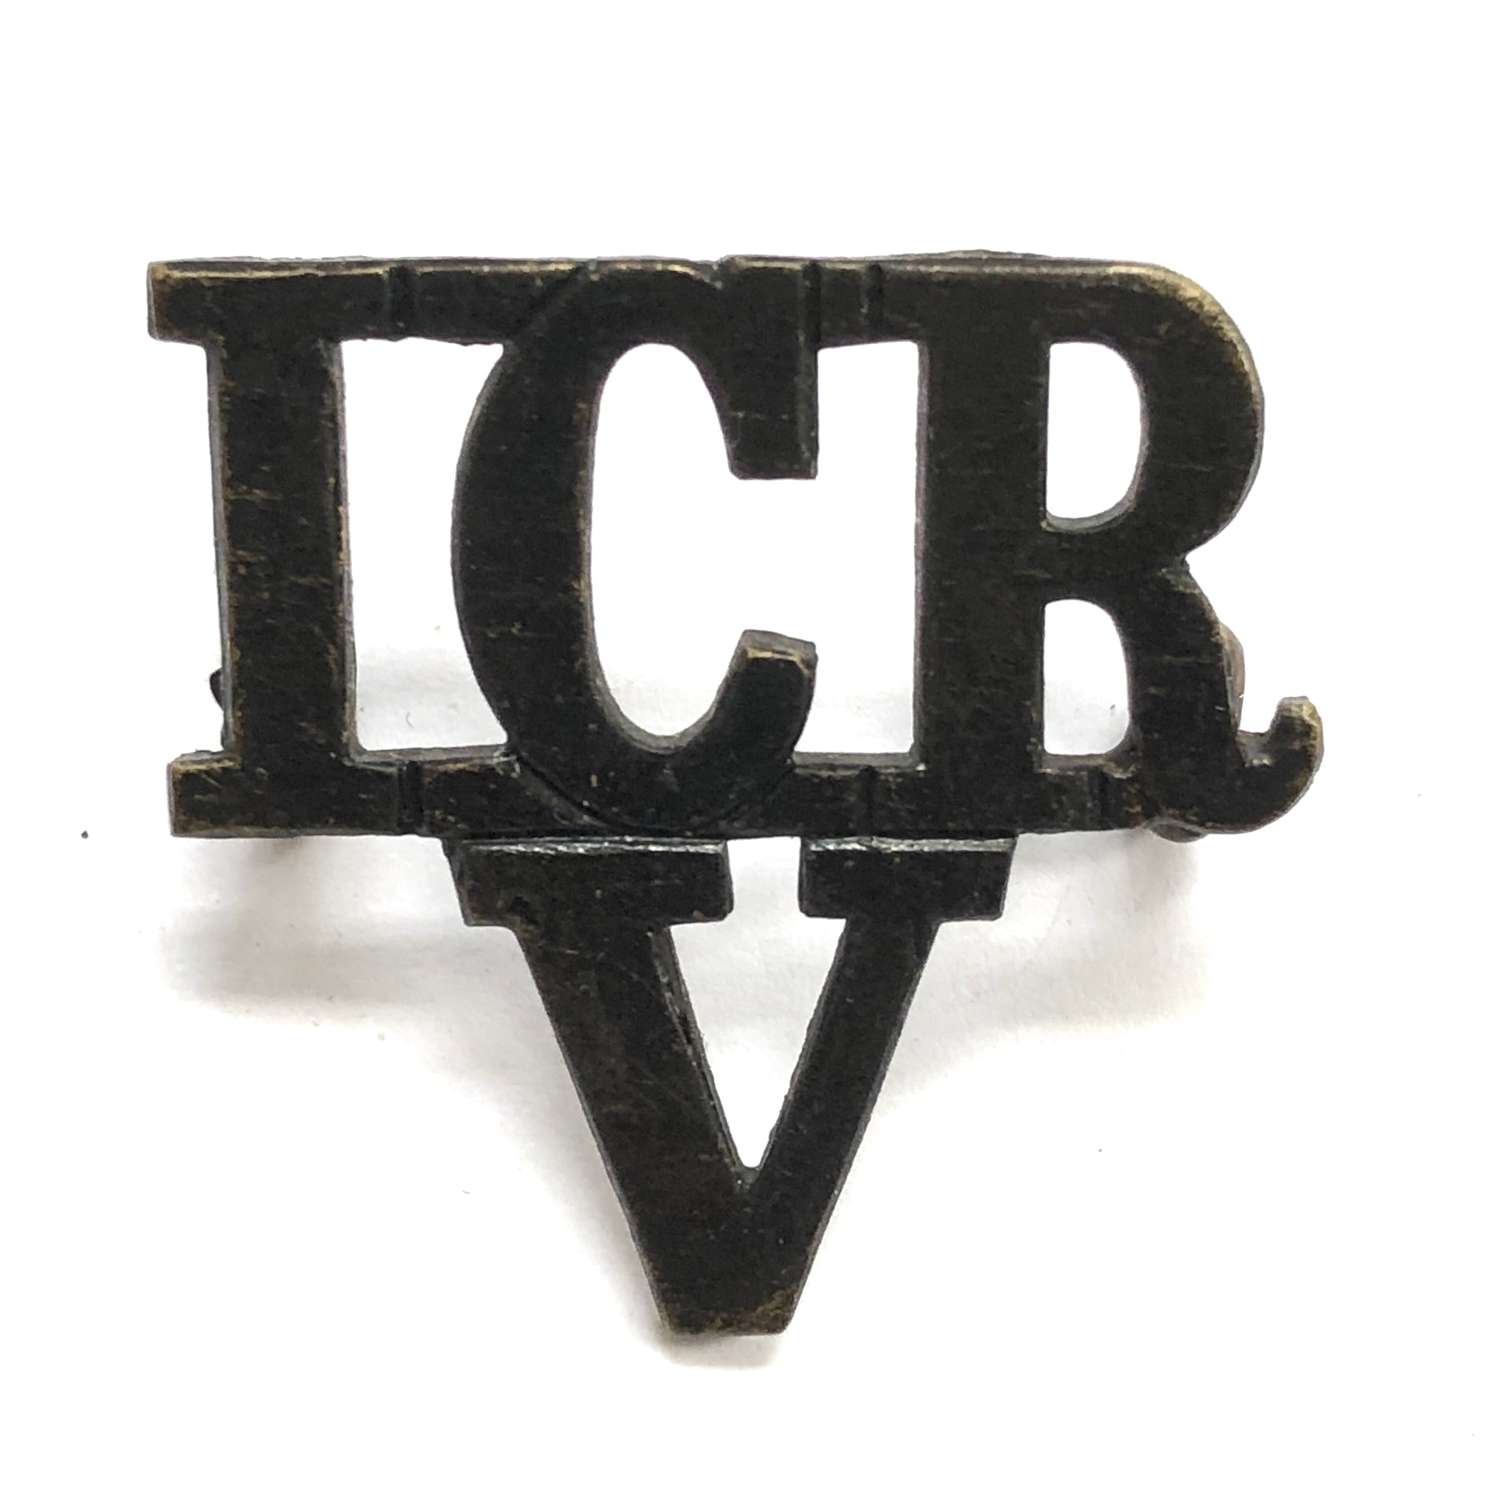 ICR / V 14th Middlesex RV (Inns of Court) pre 1908 shoulder title